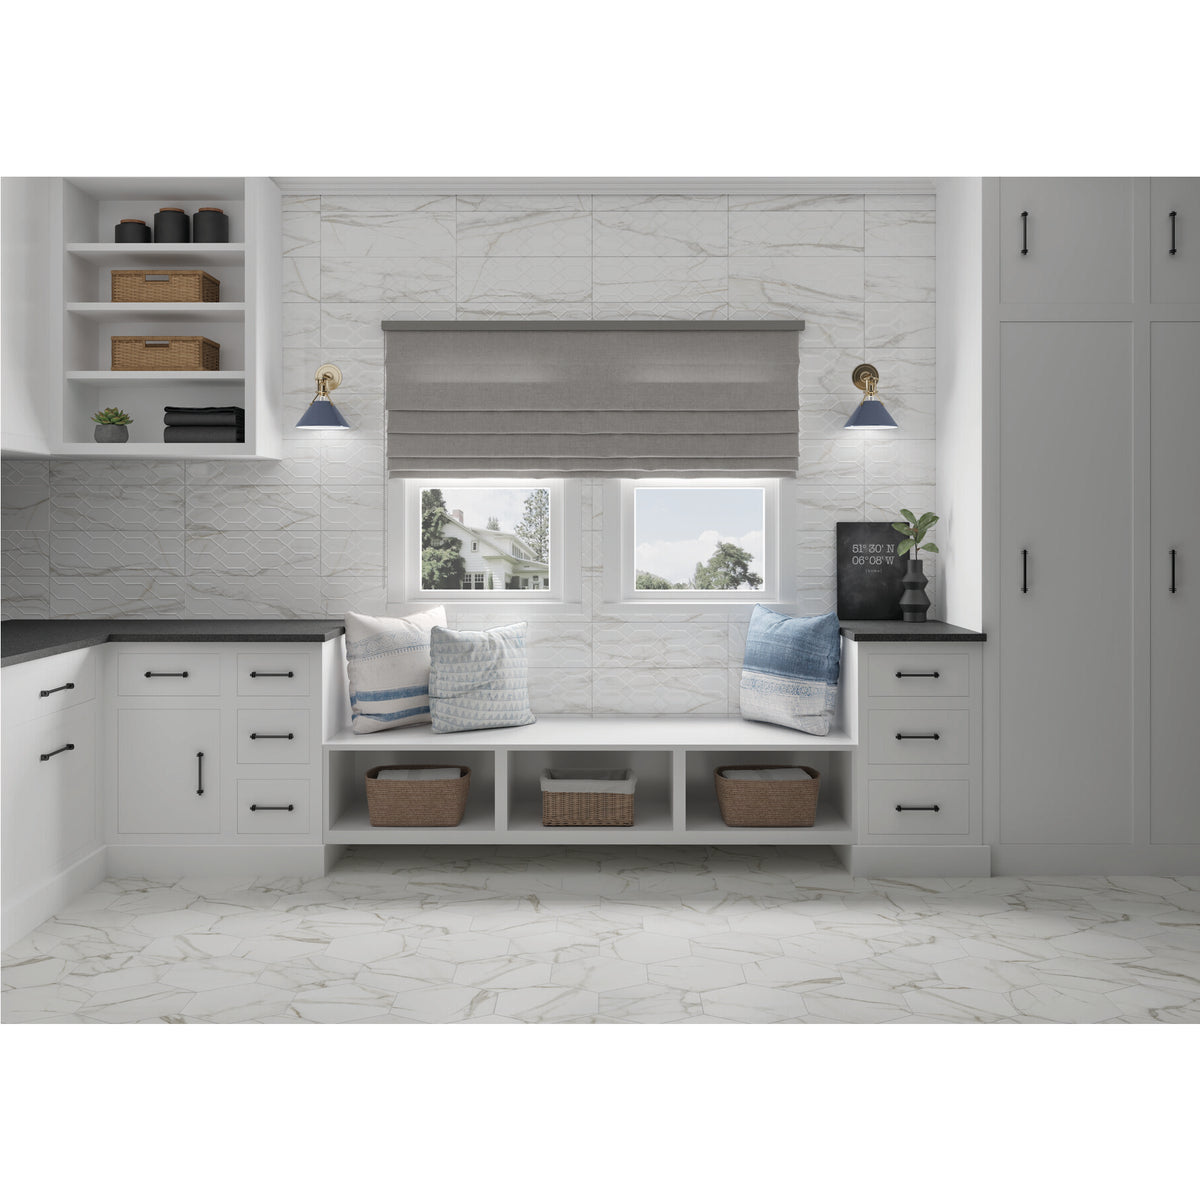 American Olean - Mythique Marble 12 in. x 12 in. Colorbody Porcelain Tile - Calacatta Venecia Polished Room